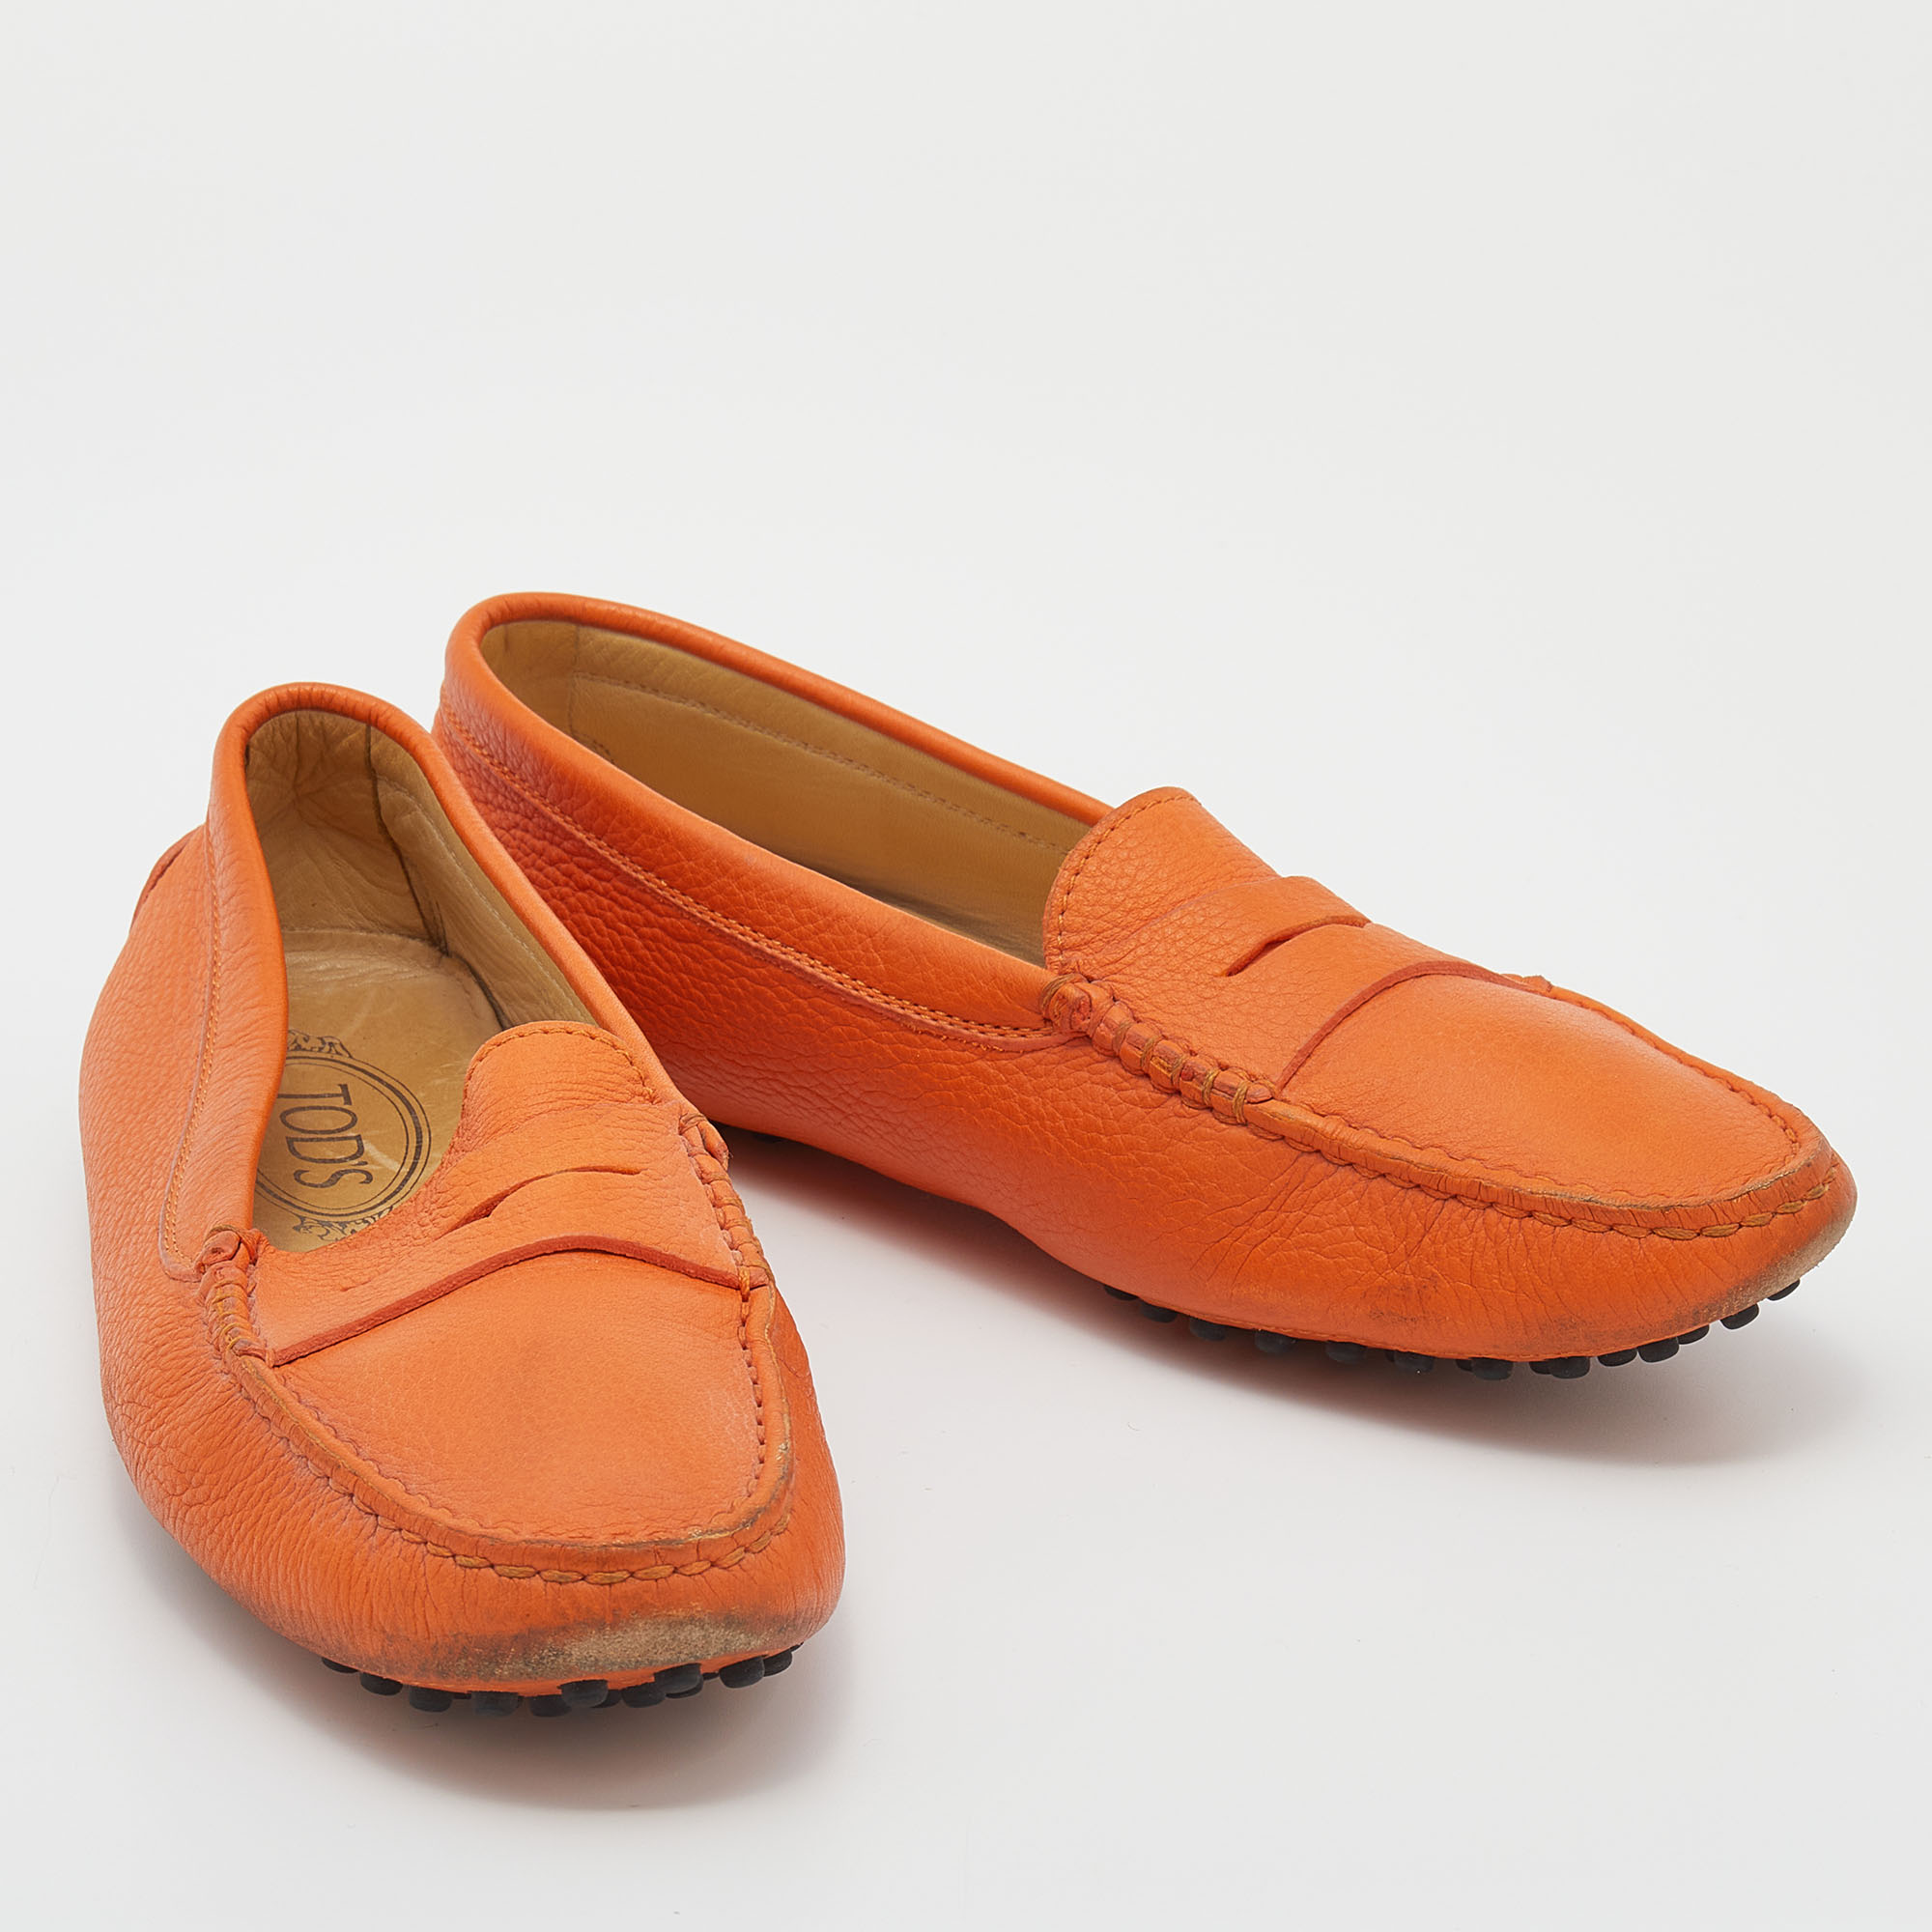 Tod's Orange Leather Penny Slip On Loafers Size 37